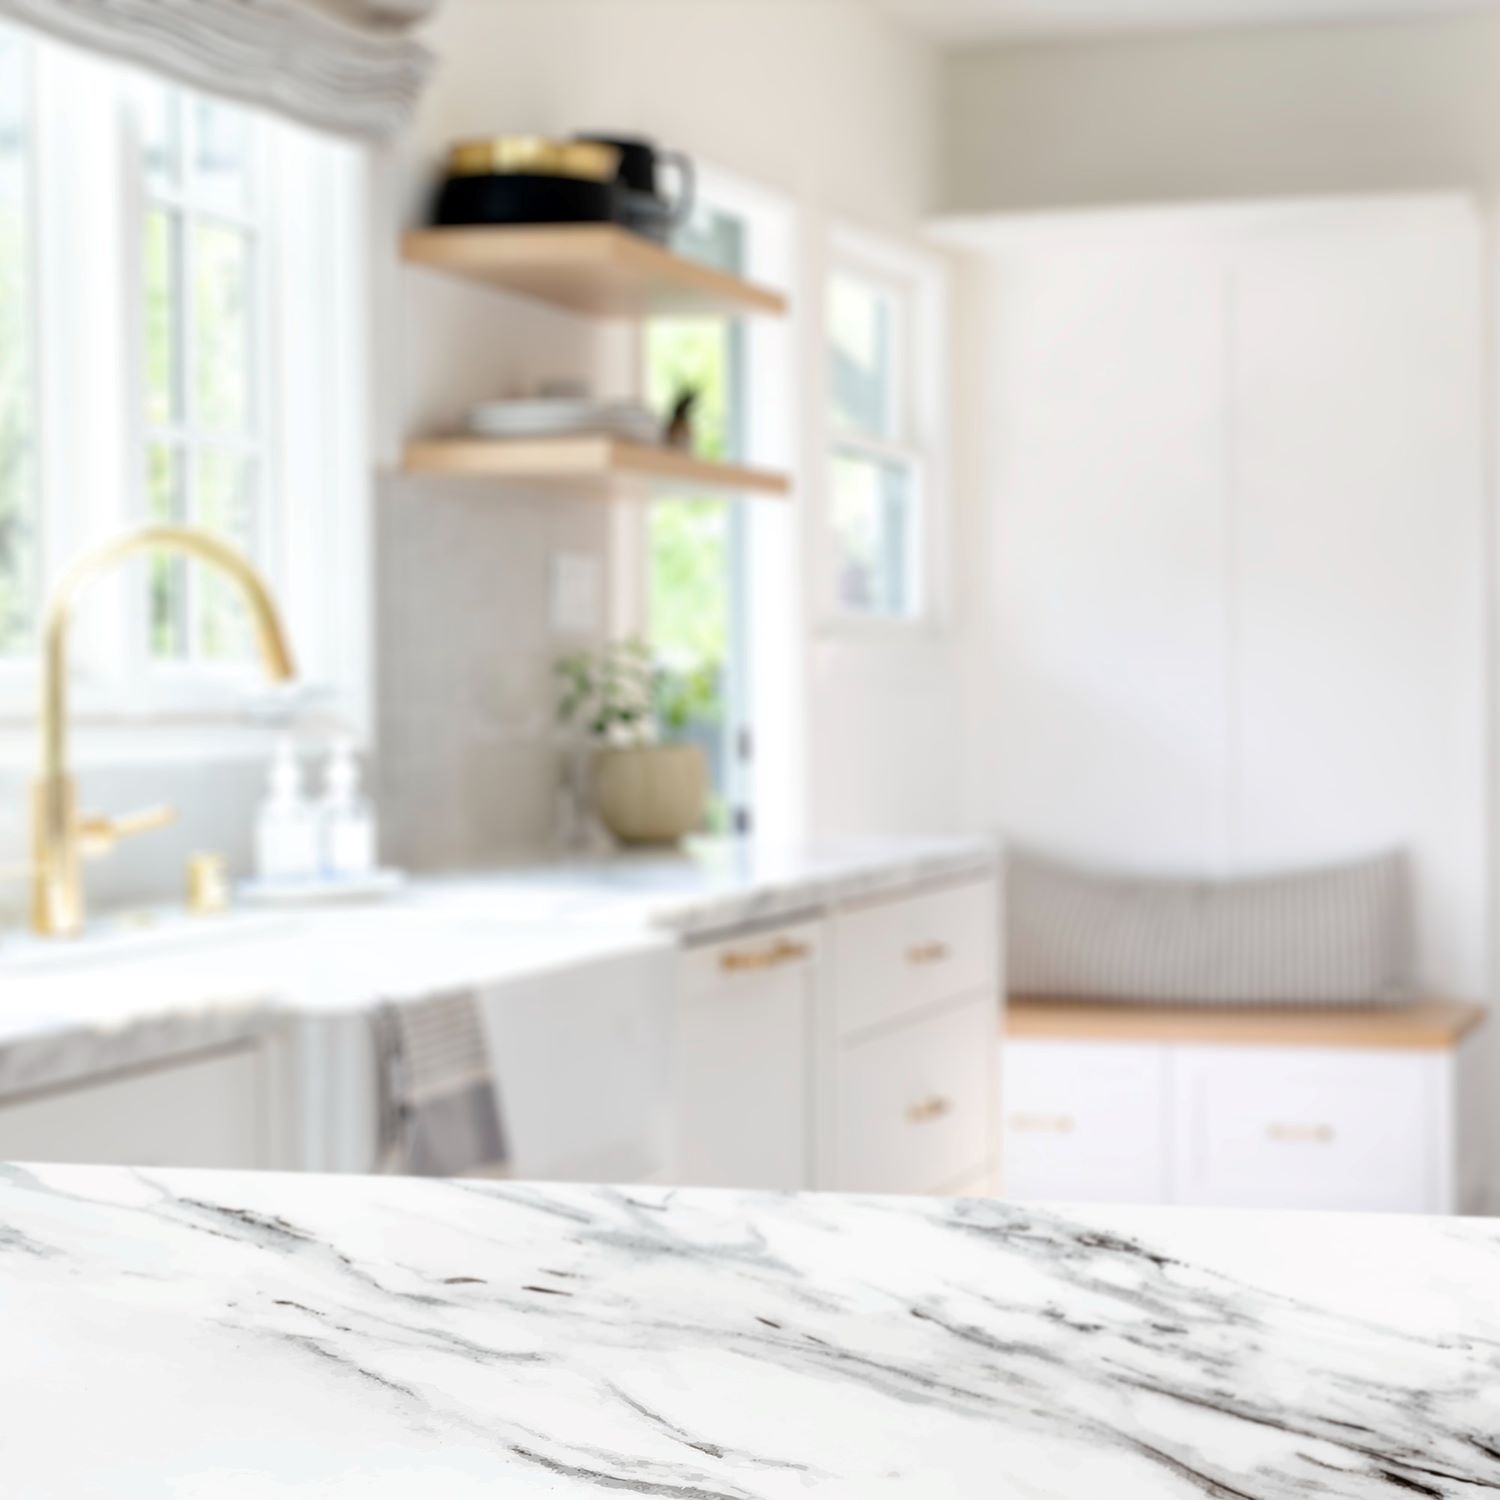 The best advance of quartz countertop is Extremely durable